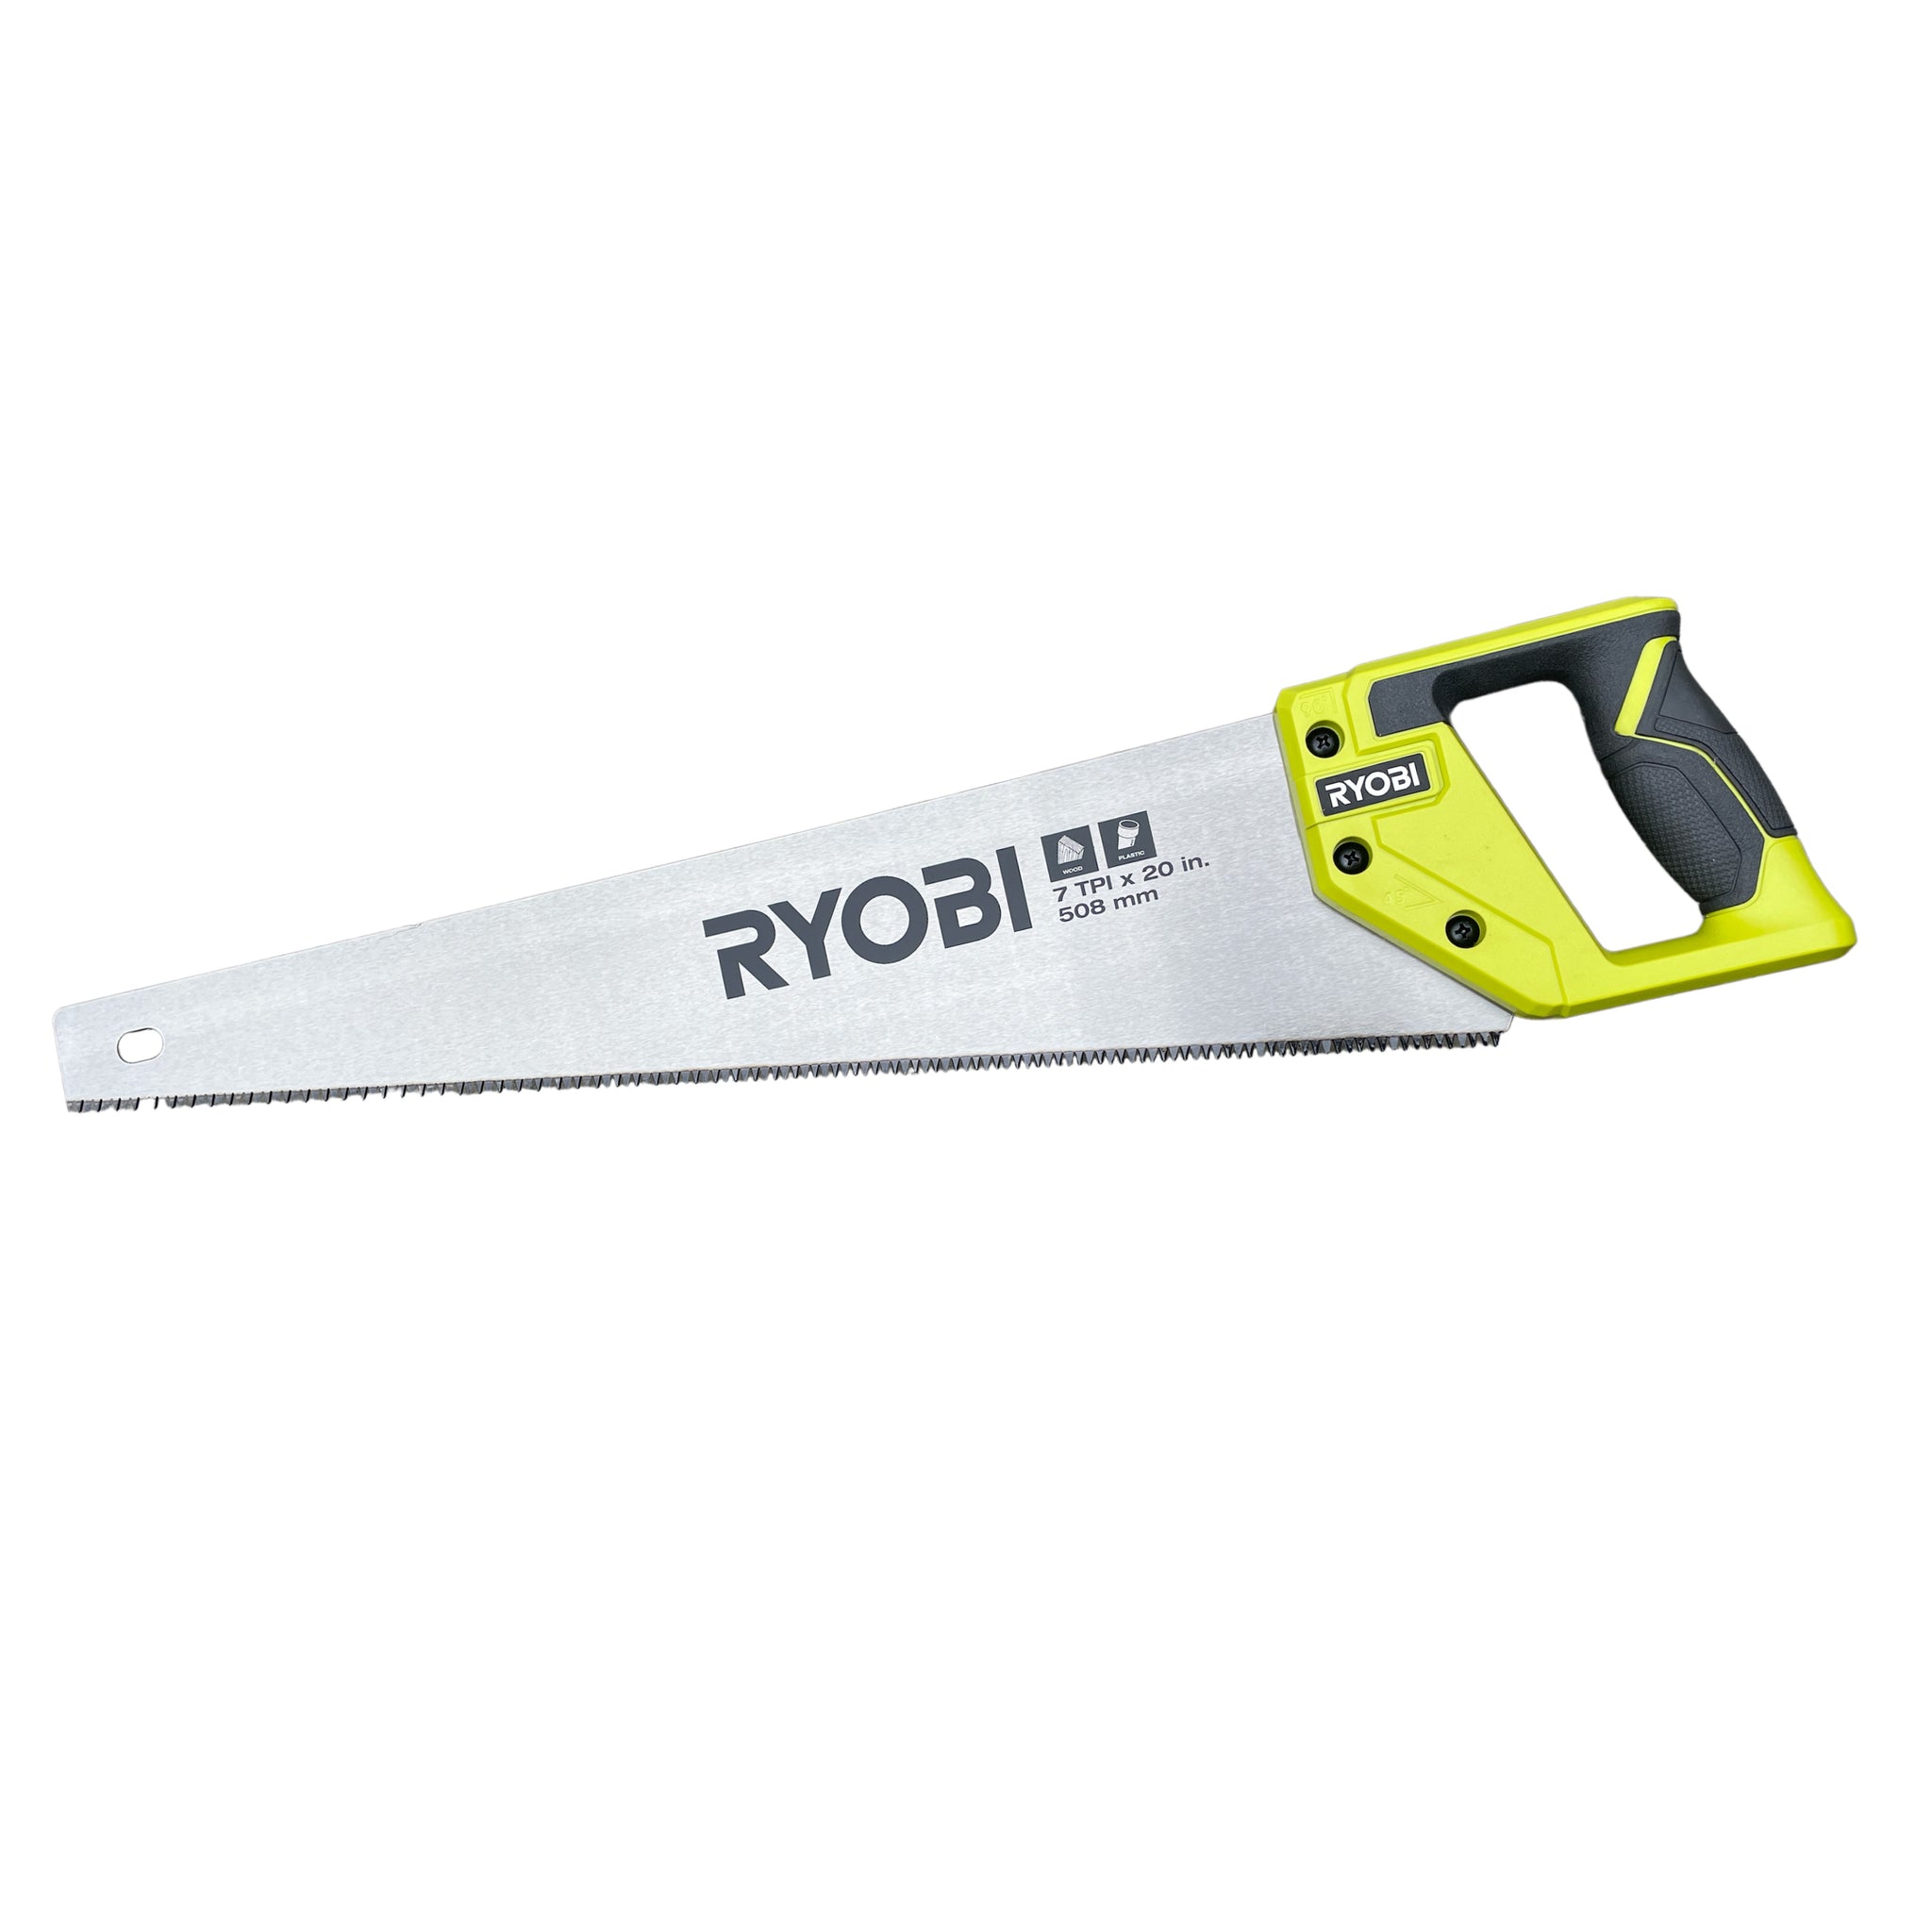 RYOBI 20 in. 7 TPI Hand Saw with Steel Blade – Ryobi Deal Finders